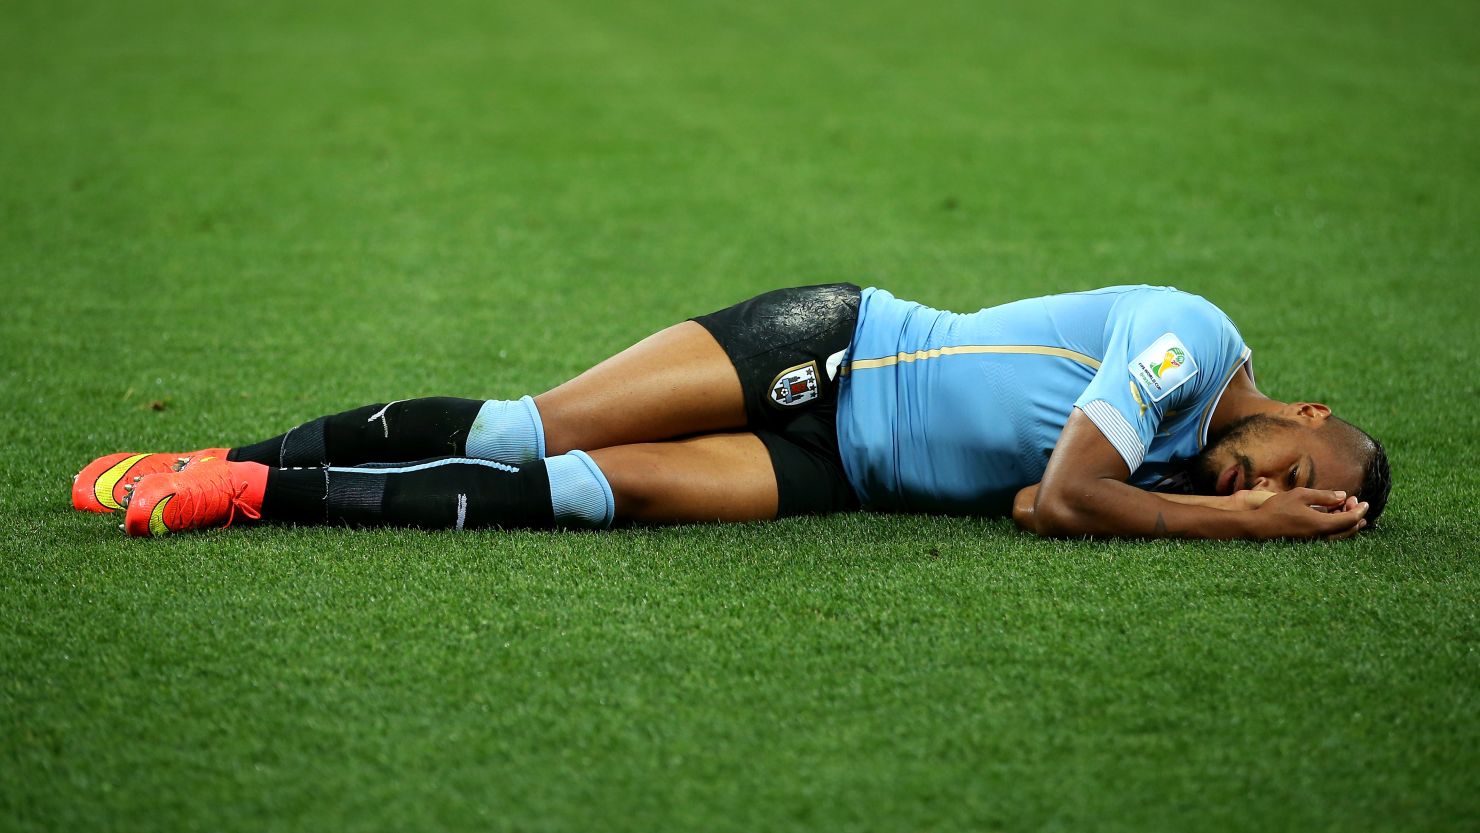 Uruguay's Alvaro Pereira was one of five documented cases of concussion at Brazil 2014, say FIFA.